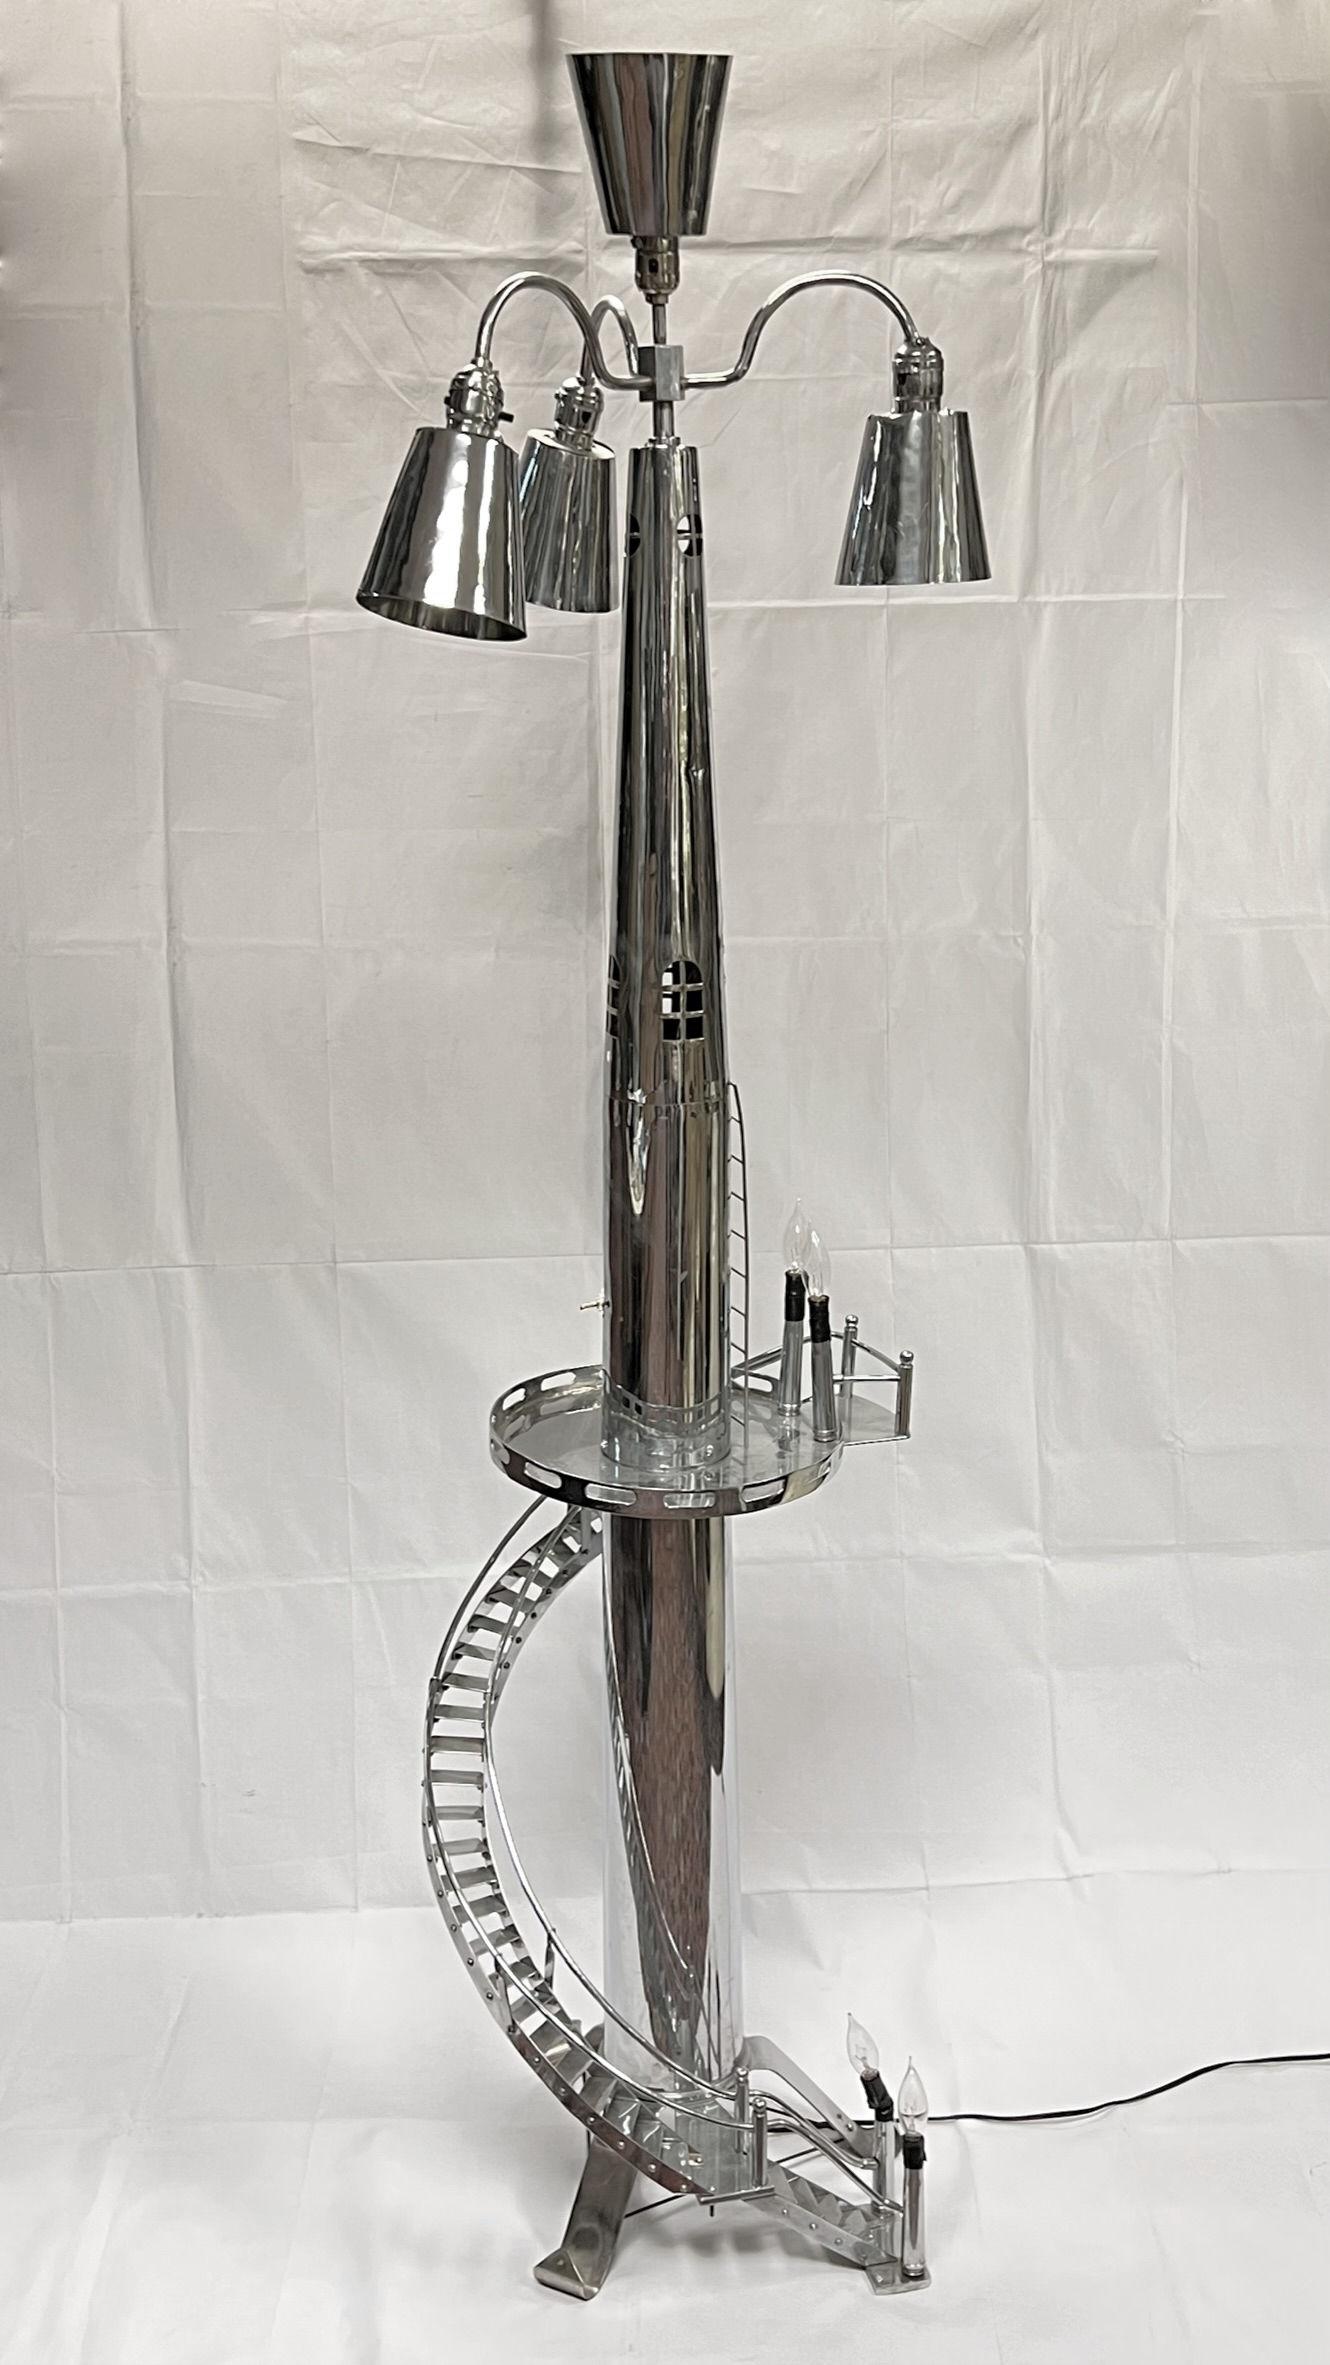 This most unusual mid-century modern chrome plated floor lamp has the form of a tower with spiral staircase, with single standard socket at top with three sockets and shades pointing downward with push button on/off switches, and two pairs of